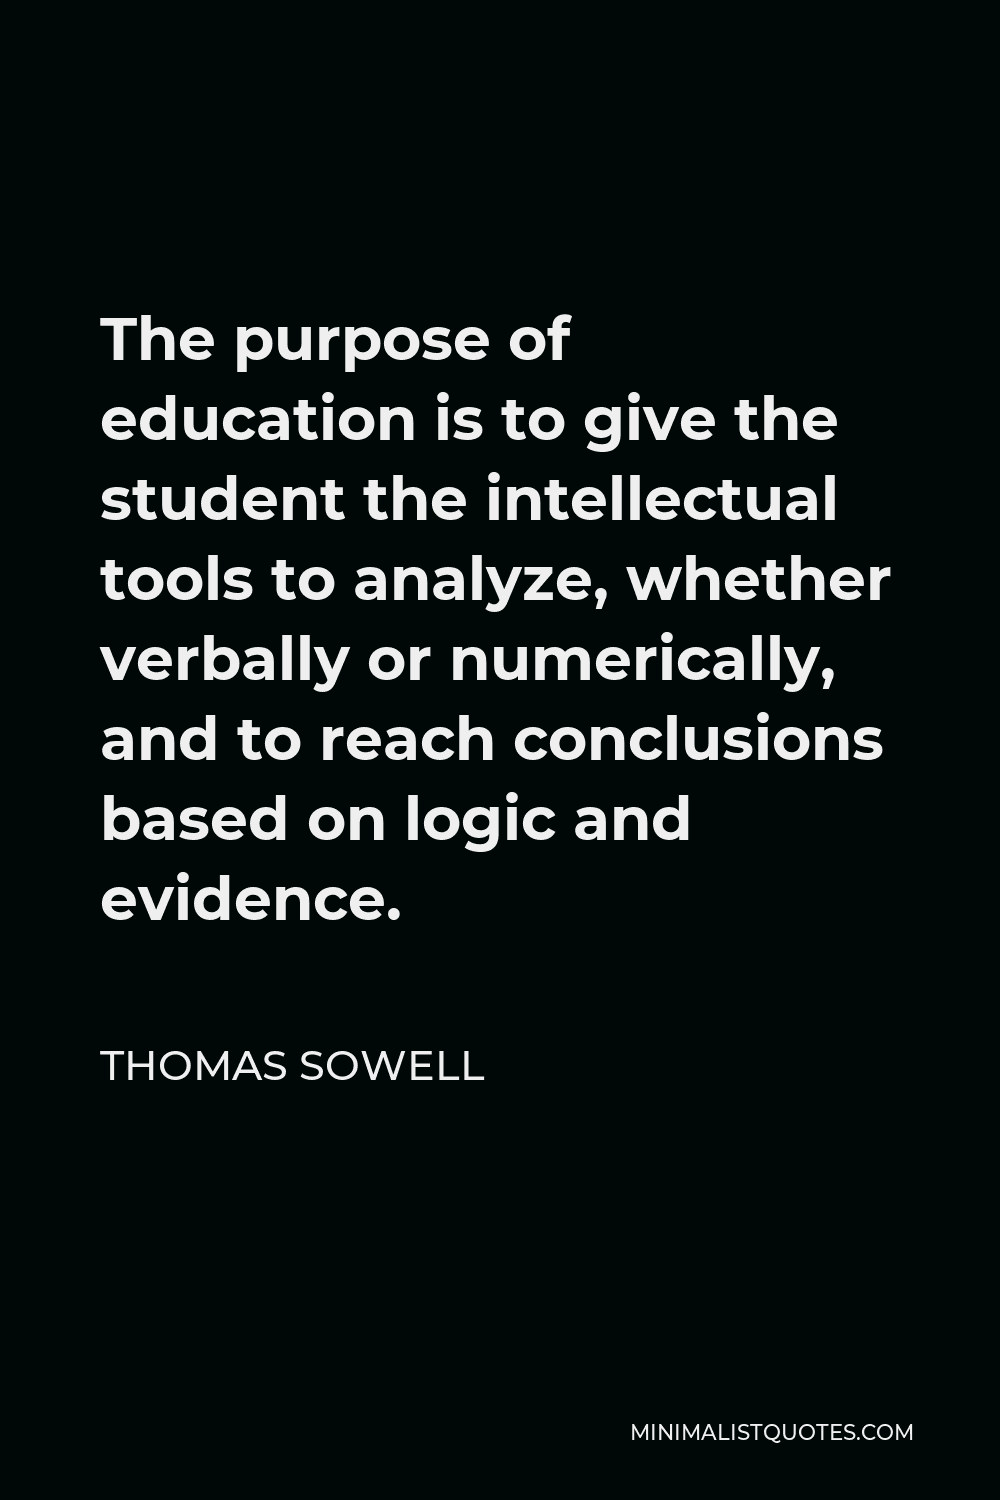 Thomas Sowell Quote - The purpose of education is to give the student the intellectual tools to analyze, whether verbally or numerically, and to reach conclusions based on logic and evidence.